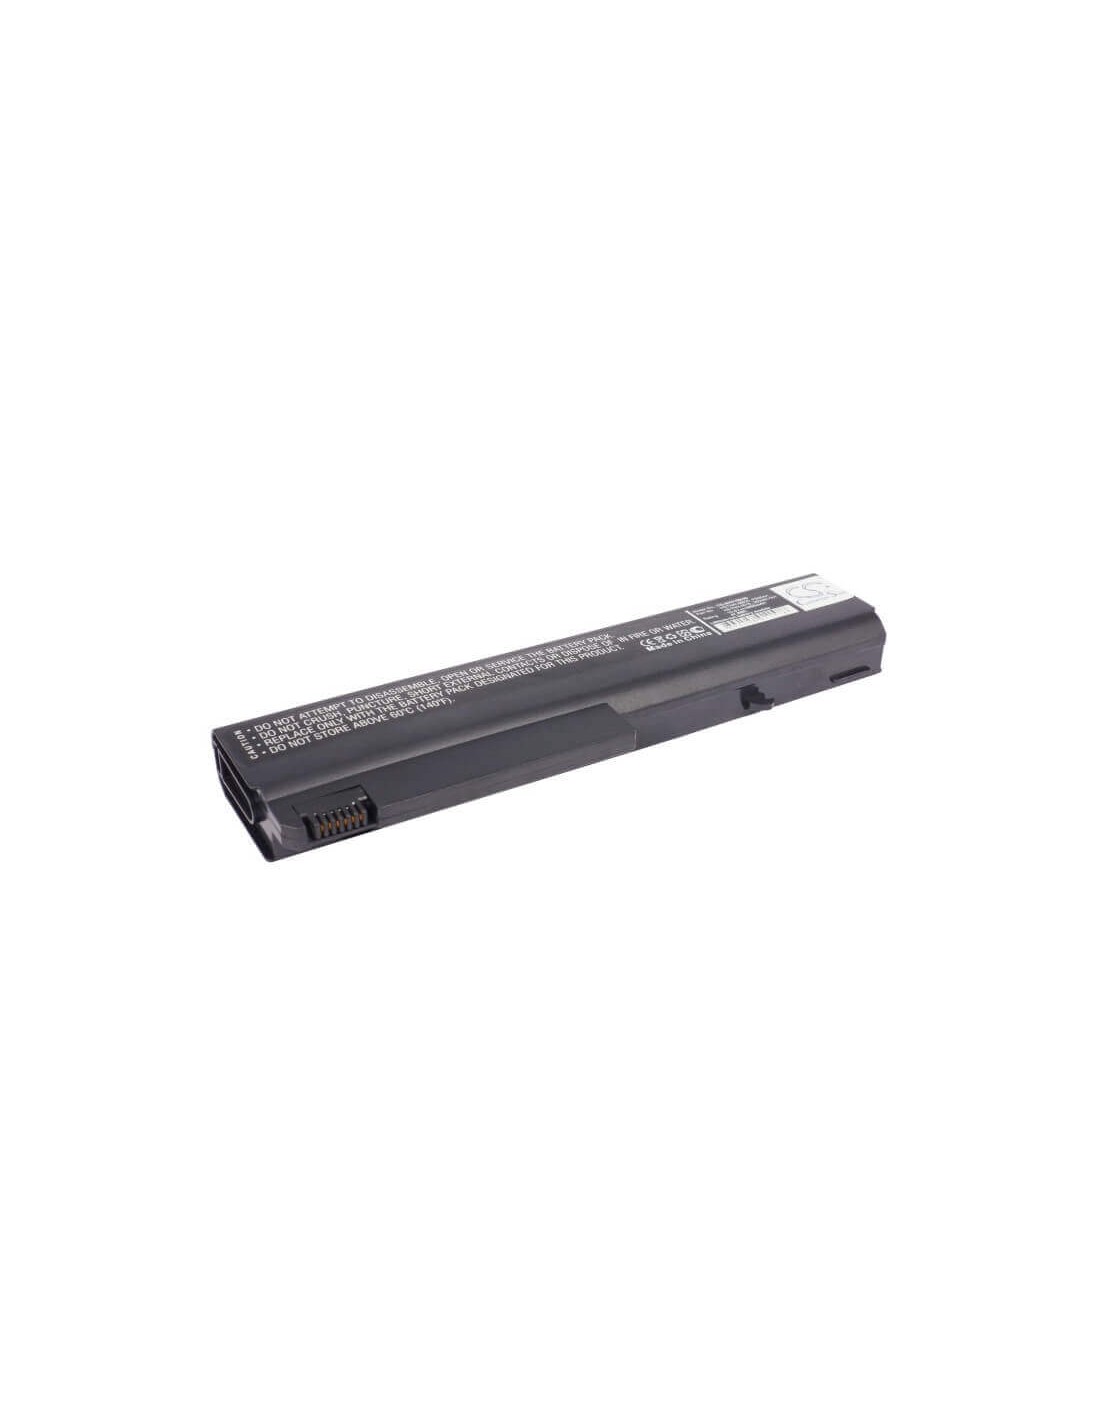 Black Battery for HP Business Notebook 6715b, Business Notebook NX6325, Business Notebook NX6110/CT 10.8V, 4400mAh - 47.52Wh